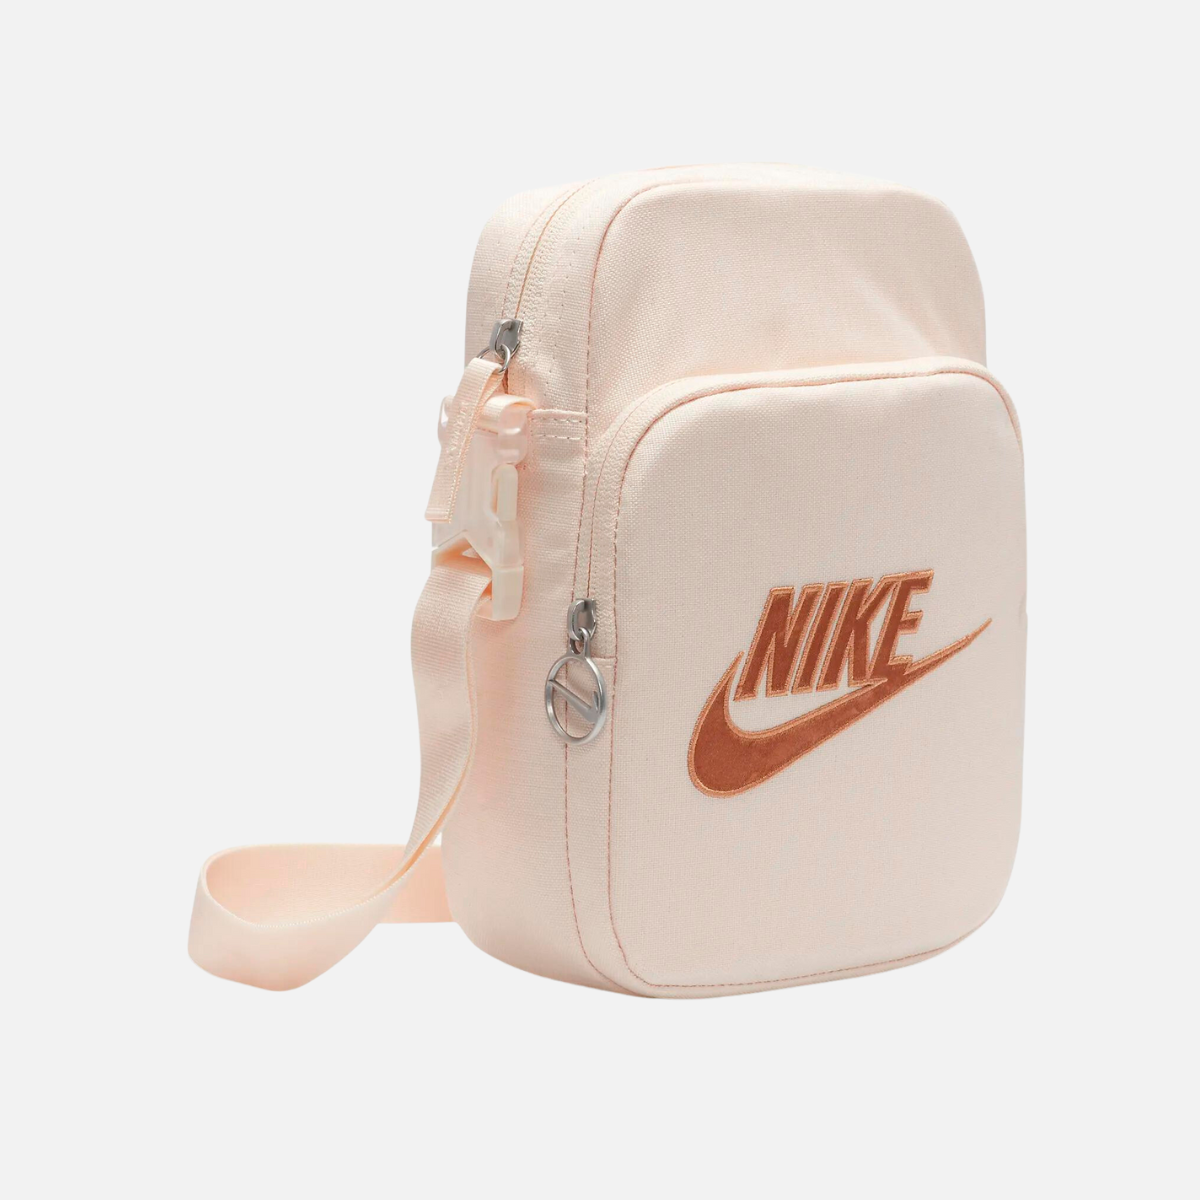 Nike Heritage Crossbody Bag (4L) - Guava Ice/Guava Ice/Amber Brown